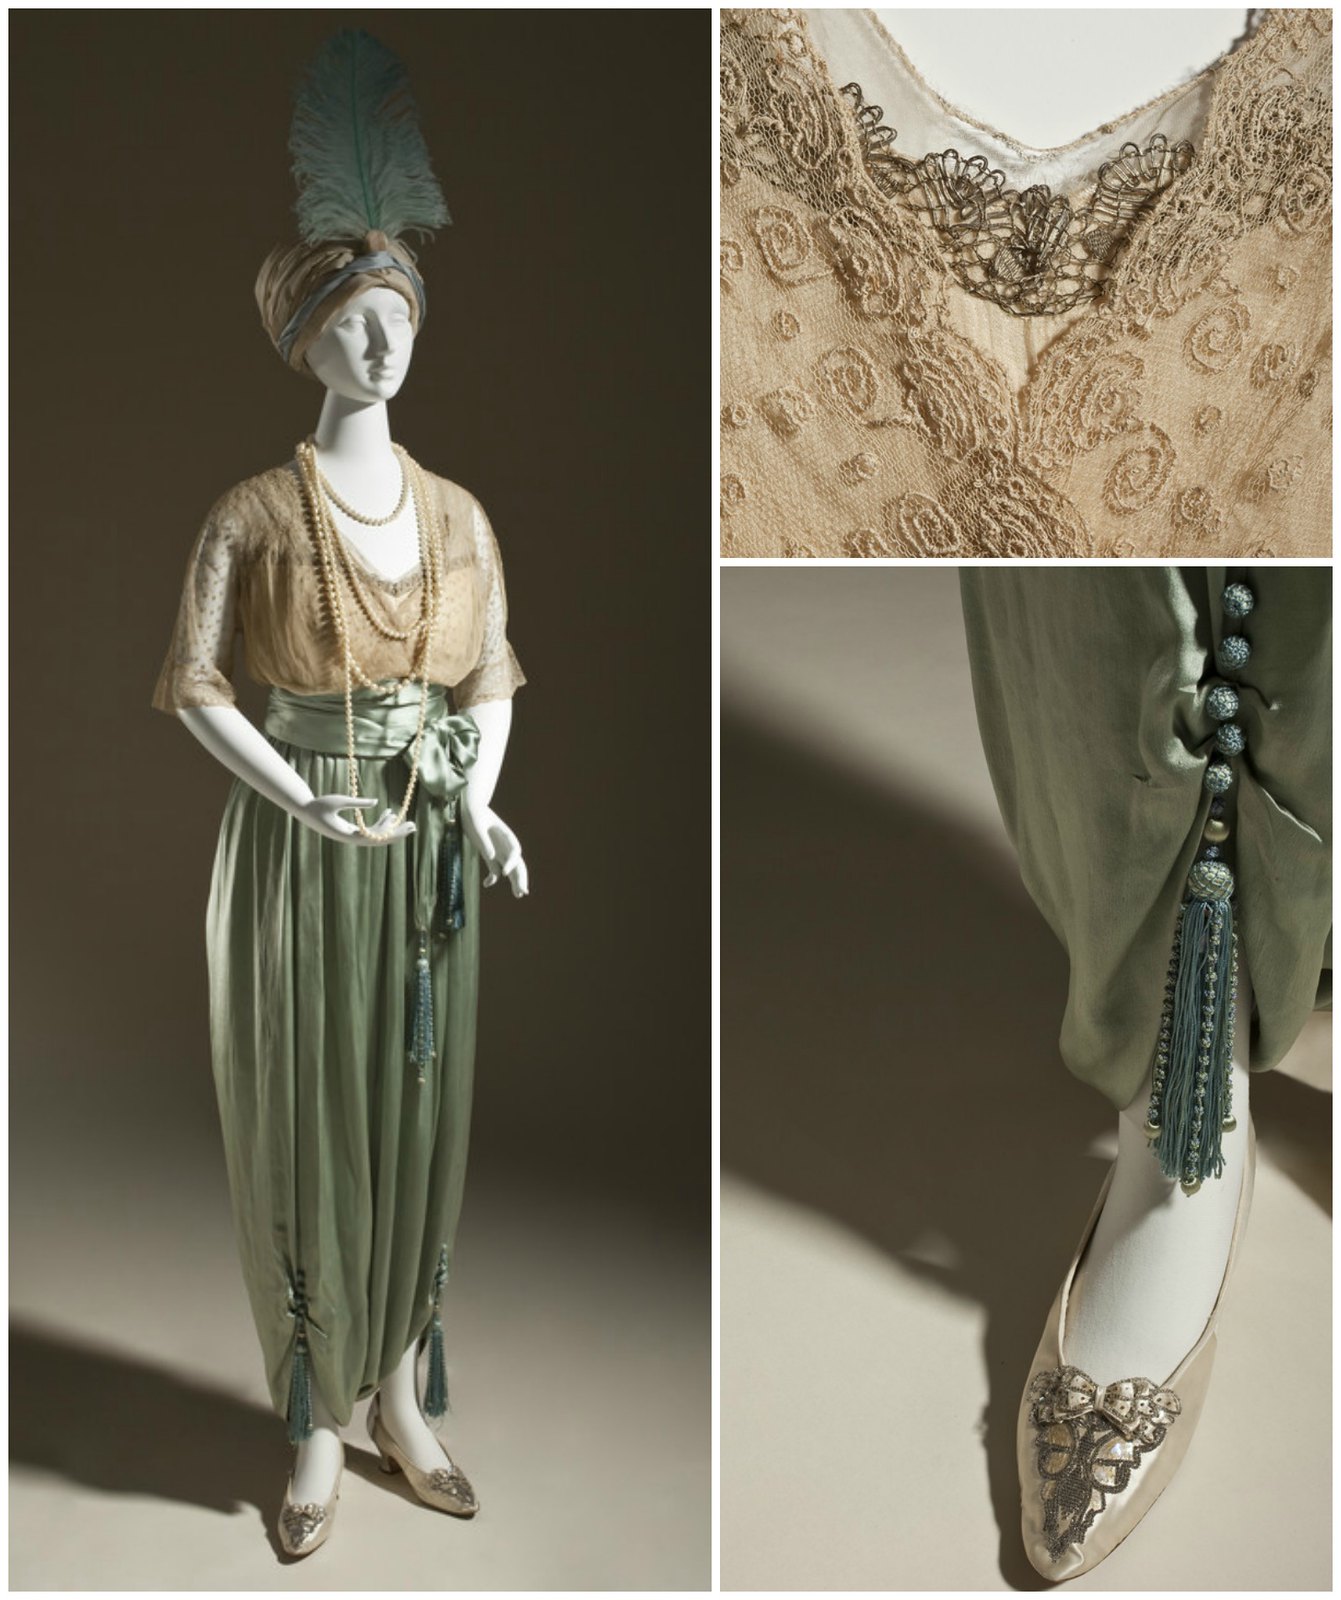 1913. Woman's Lounging Pajamas. Callot Soeurs. Silk net (tulle) and silk satin (charmeuse) with metallic-thread passementerie and silk tassels. Credit LACMA.